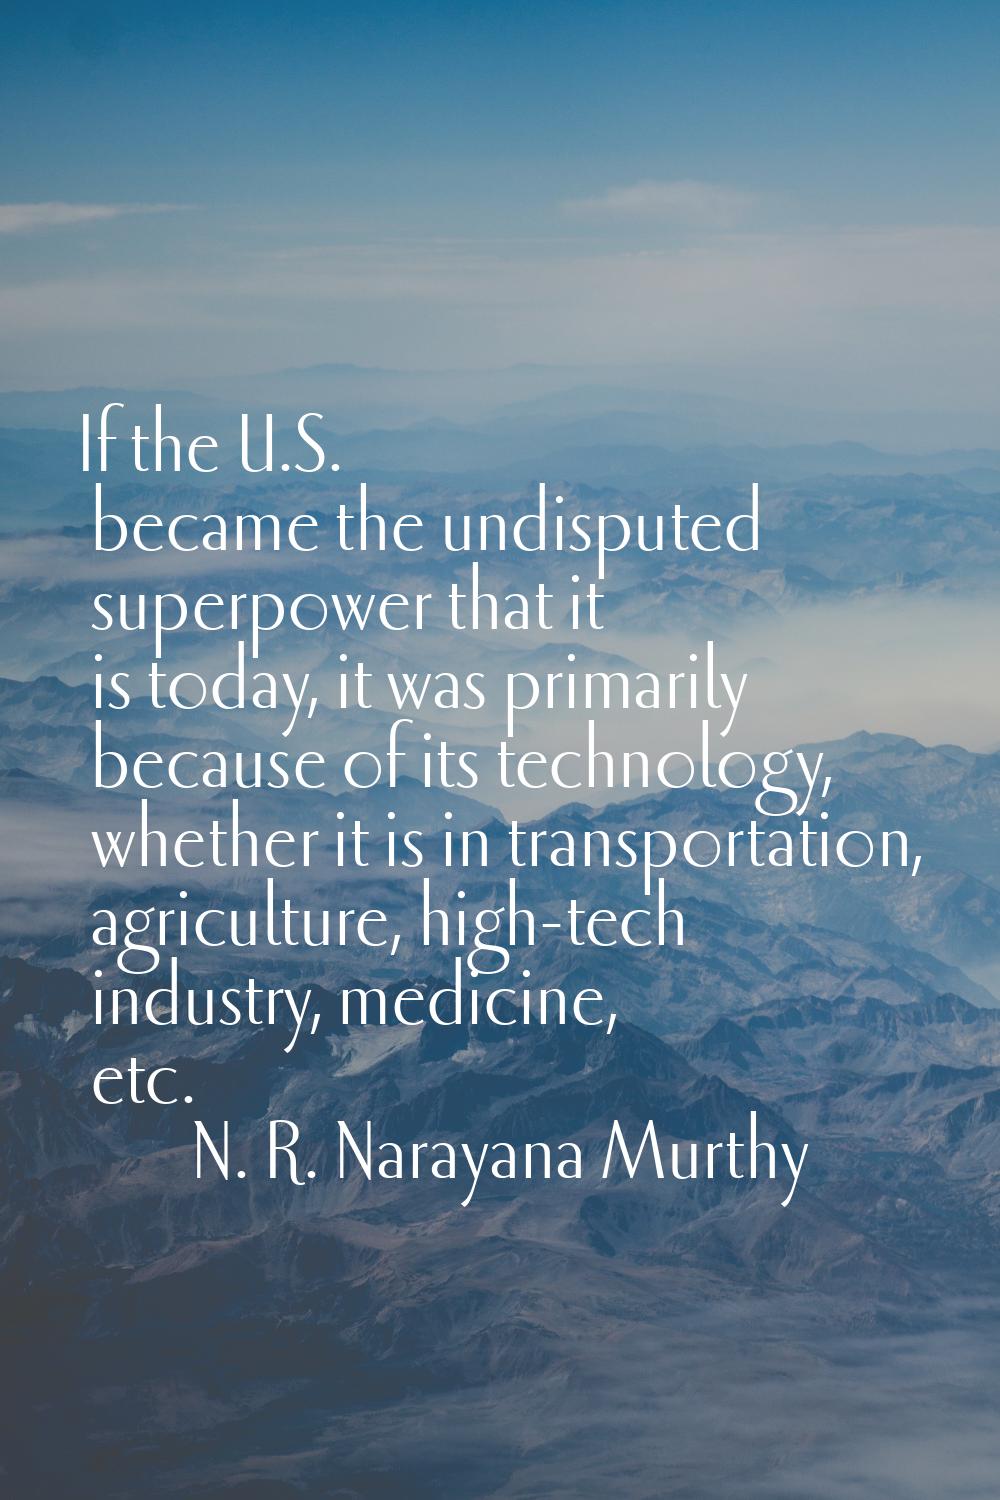 If the U.S. became the undisputed superpower that it is today, it was primarily because of its tech